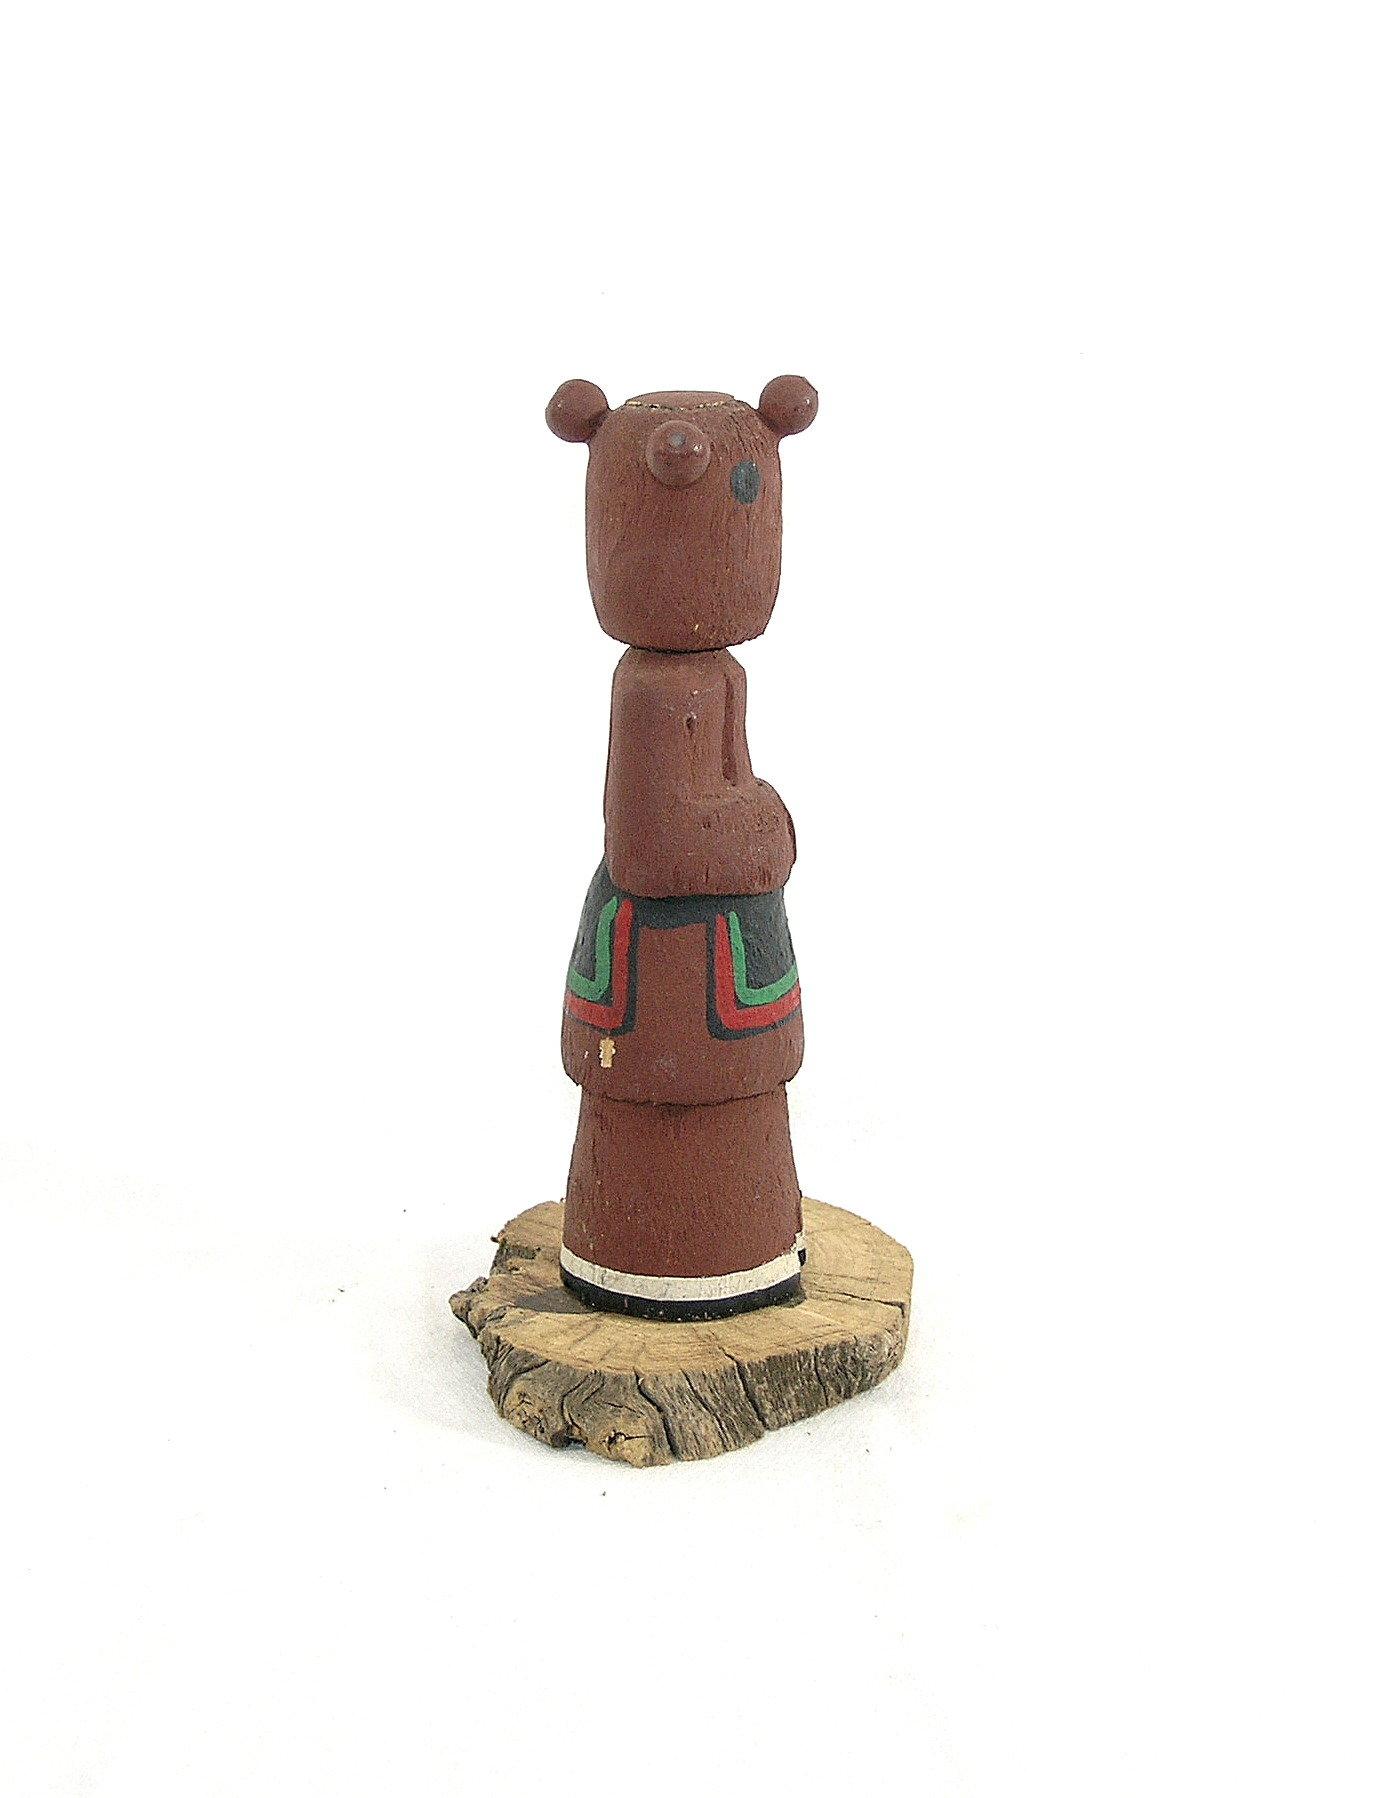 Native American Pueblo Indian Wooden Kachina Doll.   7" Tall